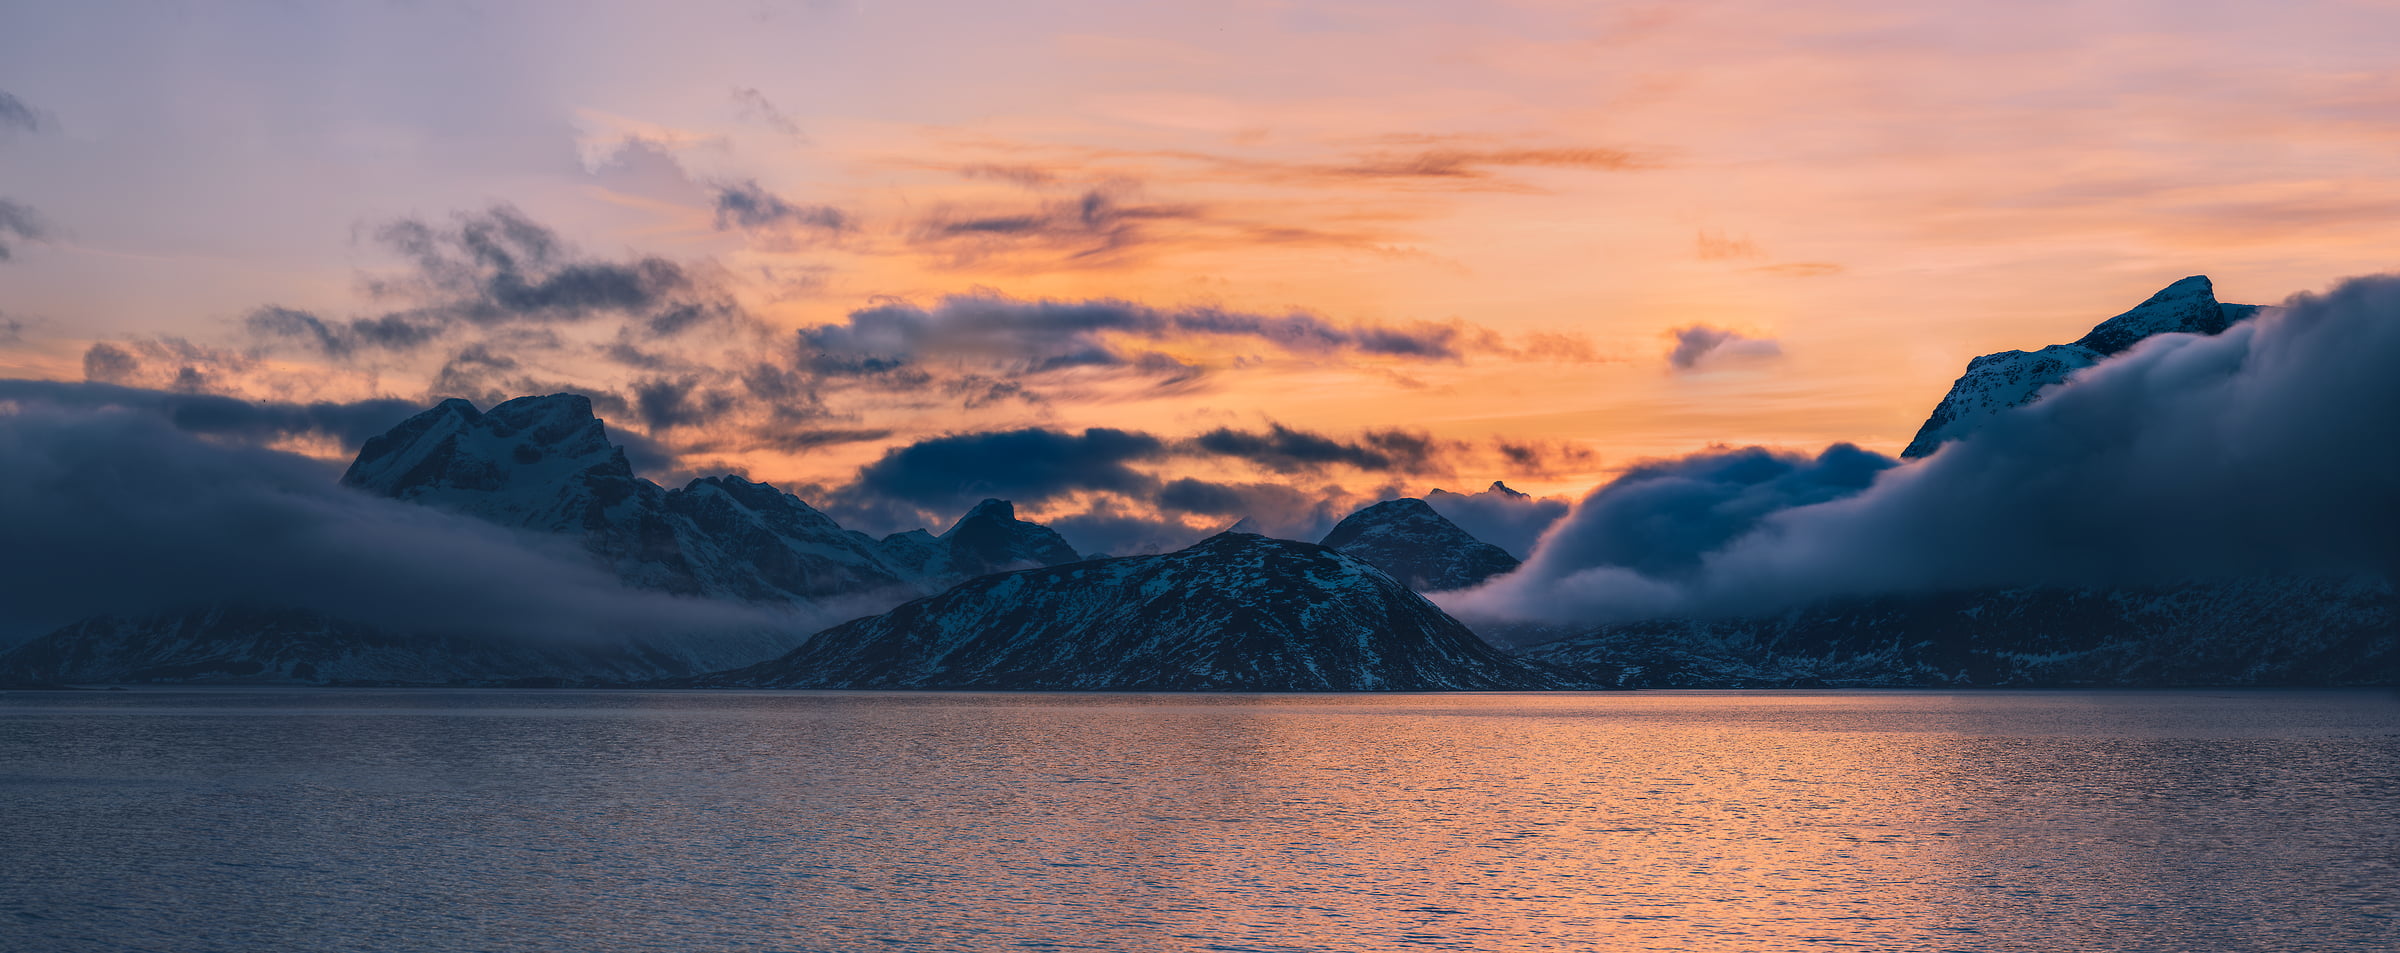 1,497 megapixels! A very high resolution, large-format VAST photo print of a Norway landscape with water and mountains at sunset; photograph created by Alfred Feil in Flakstadoy, Lofoten, Norway.